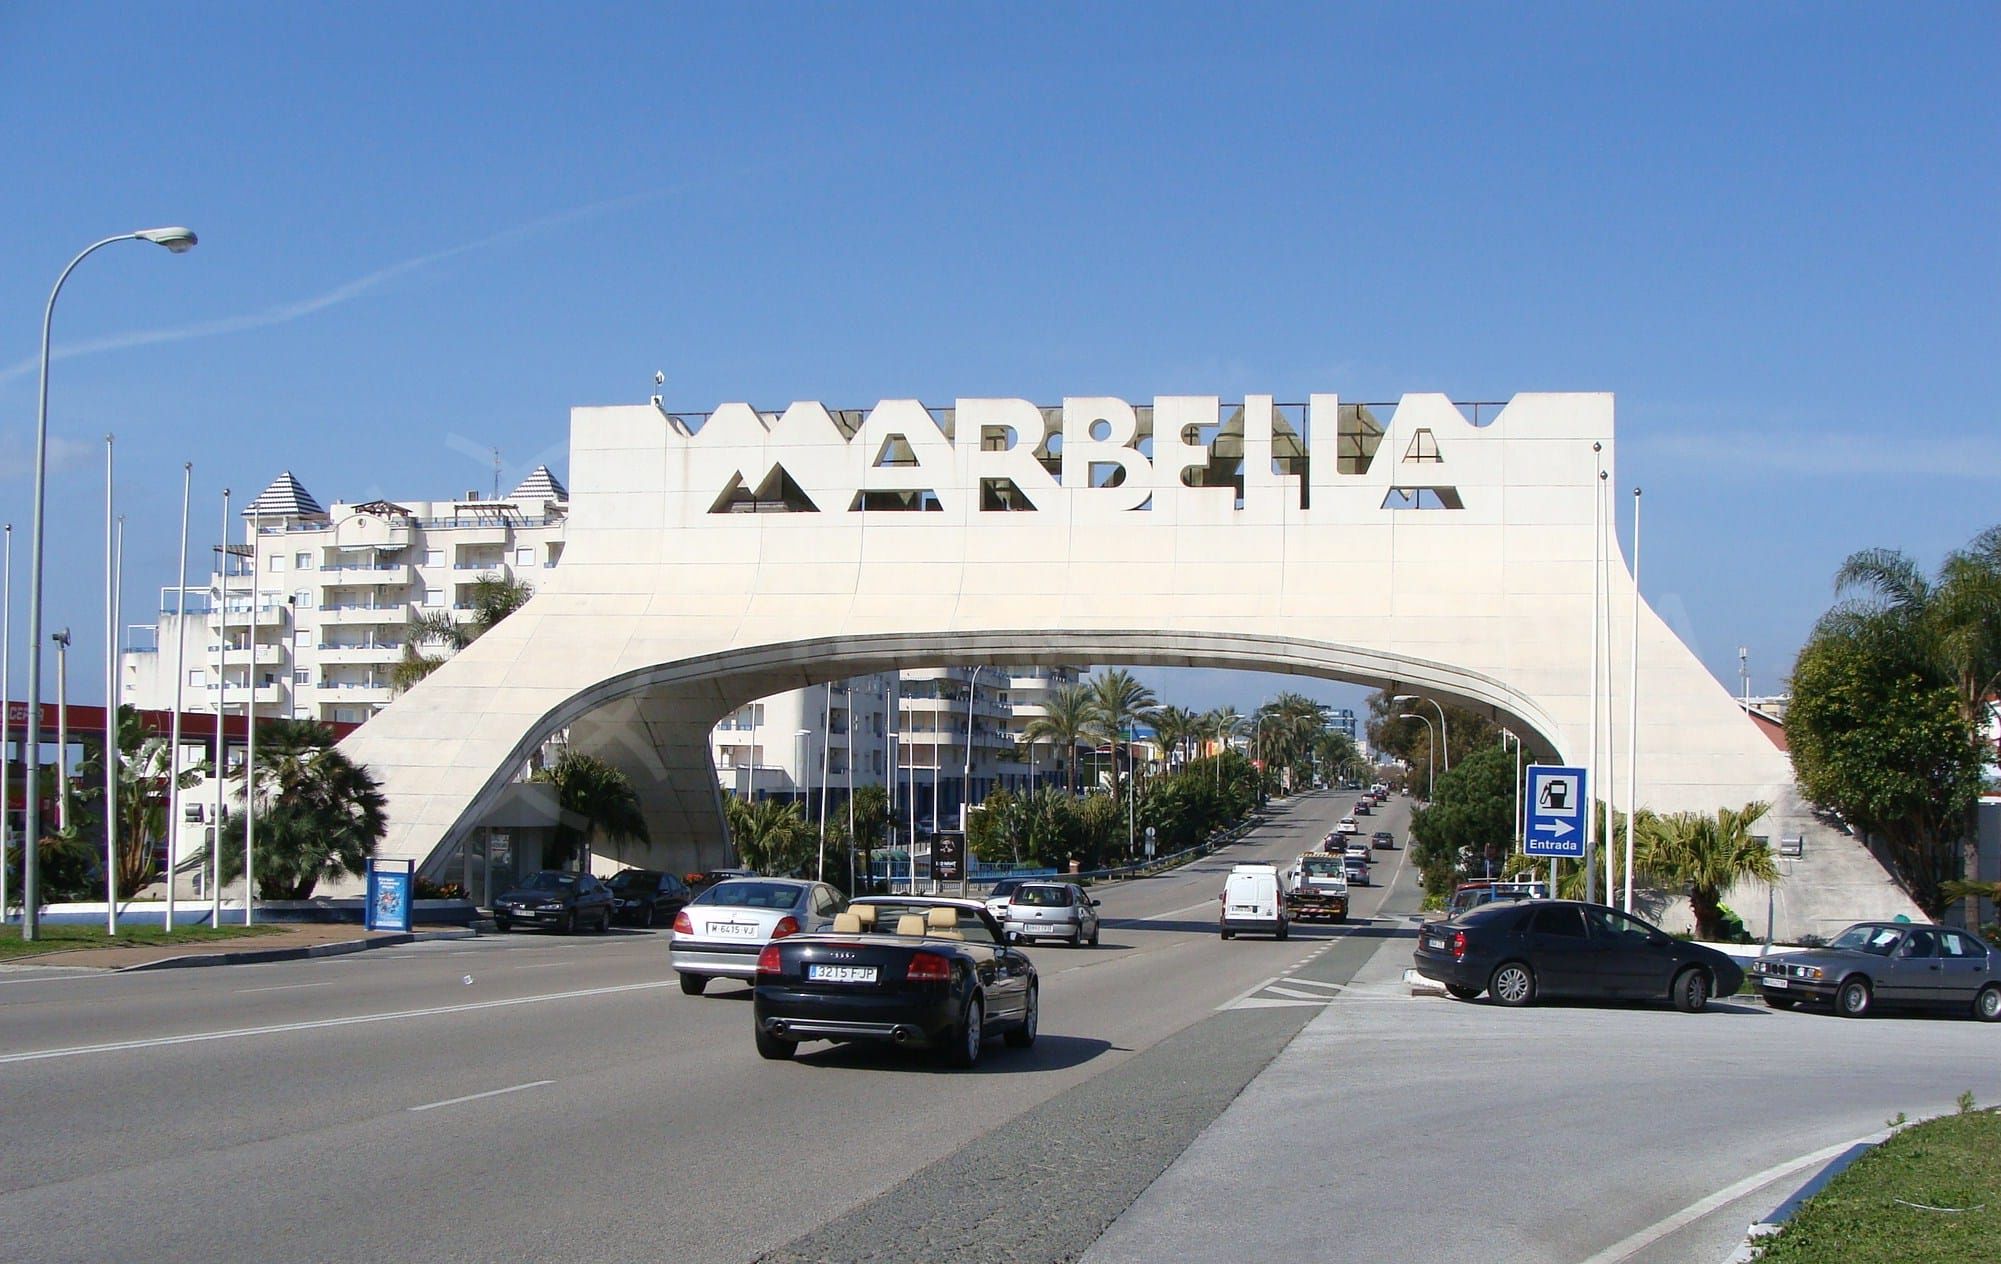 Room for 17,000 more homes to be legally built in Marbella